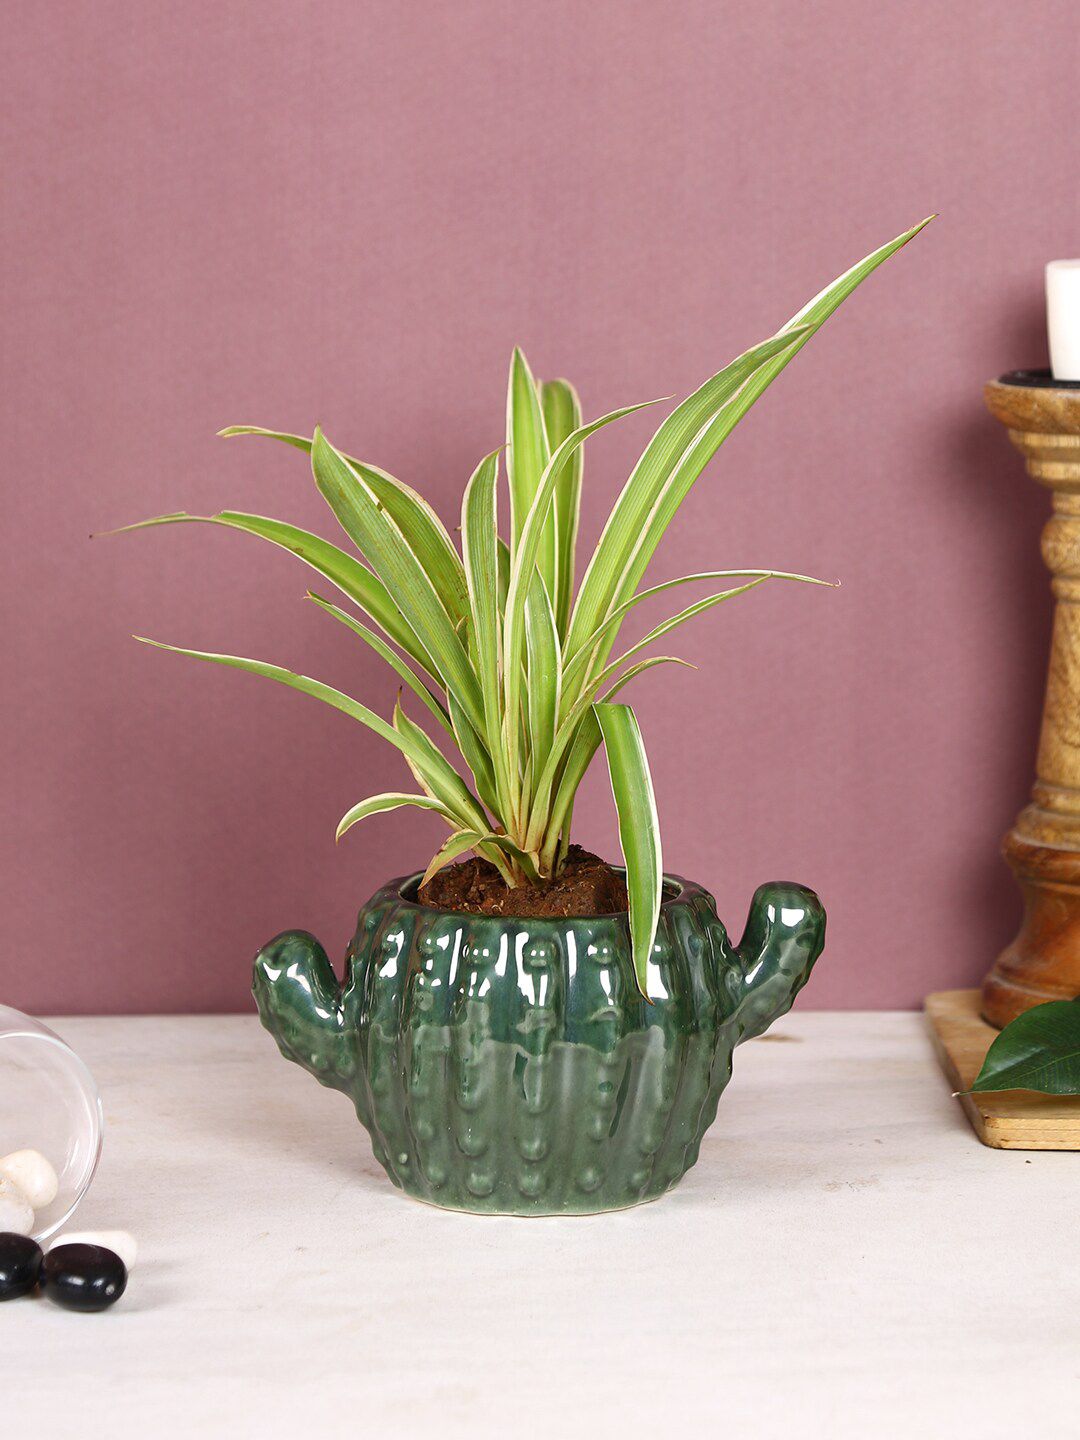 Aapno Rajasthan Green Textured Ceremic Cactus Shaped Planter Price in India